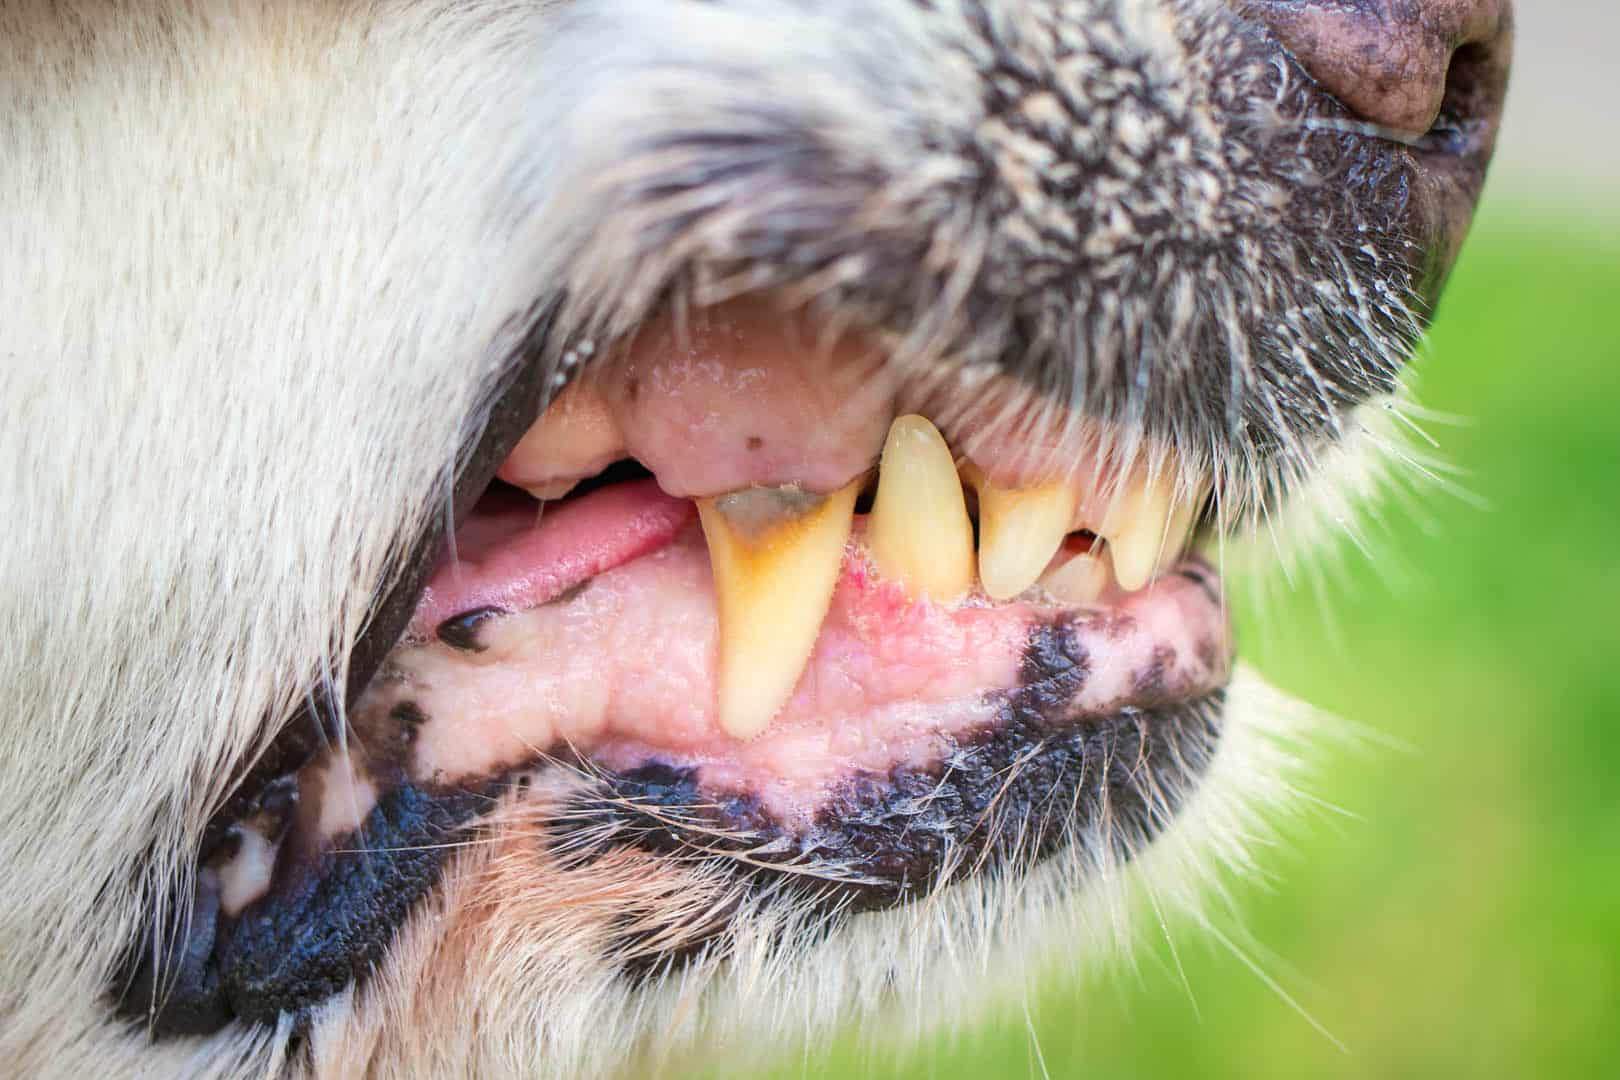 scary snarling dog showing teeth